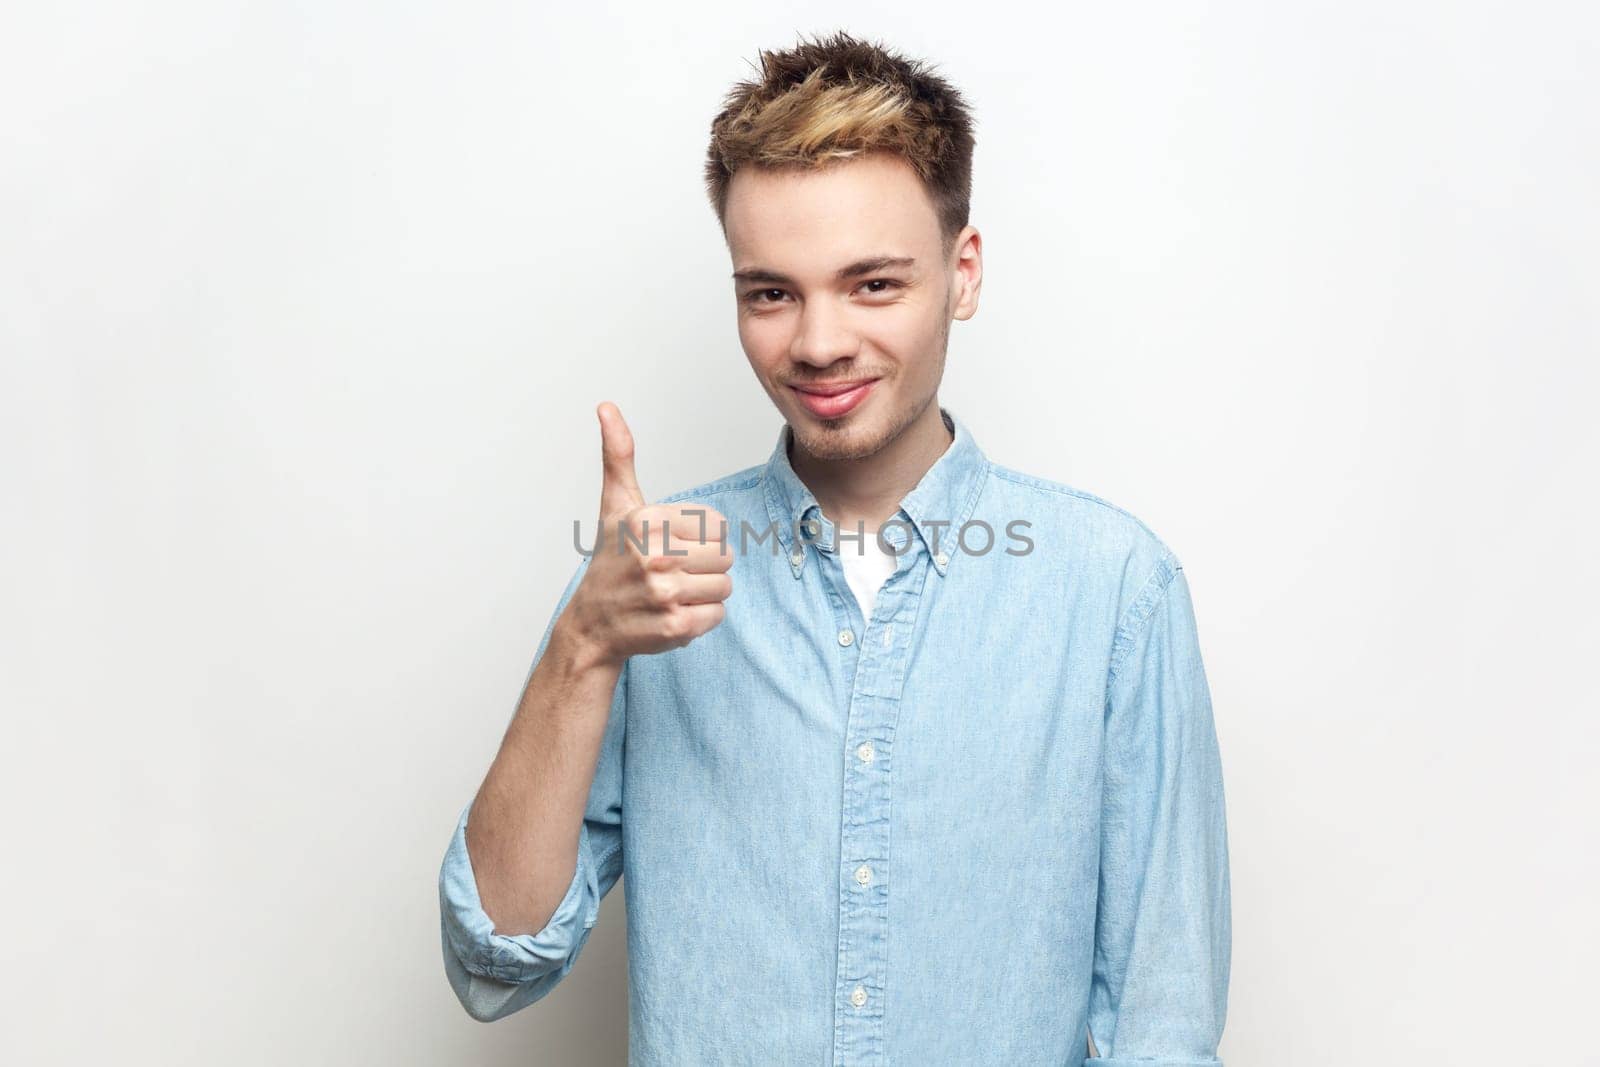 Portrait of smiling happy cheerful man wearing denim shirt showing like gesture, looking at camera, standing with thumb up, expressing happiness. Indoor studio shot isolated on gray background.